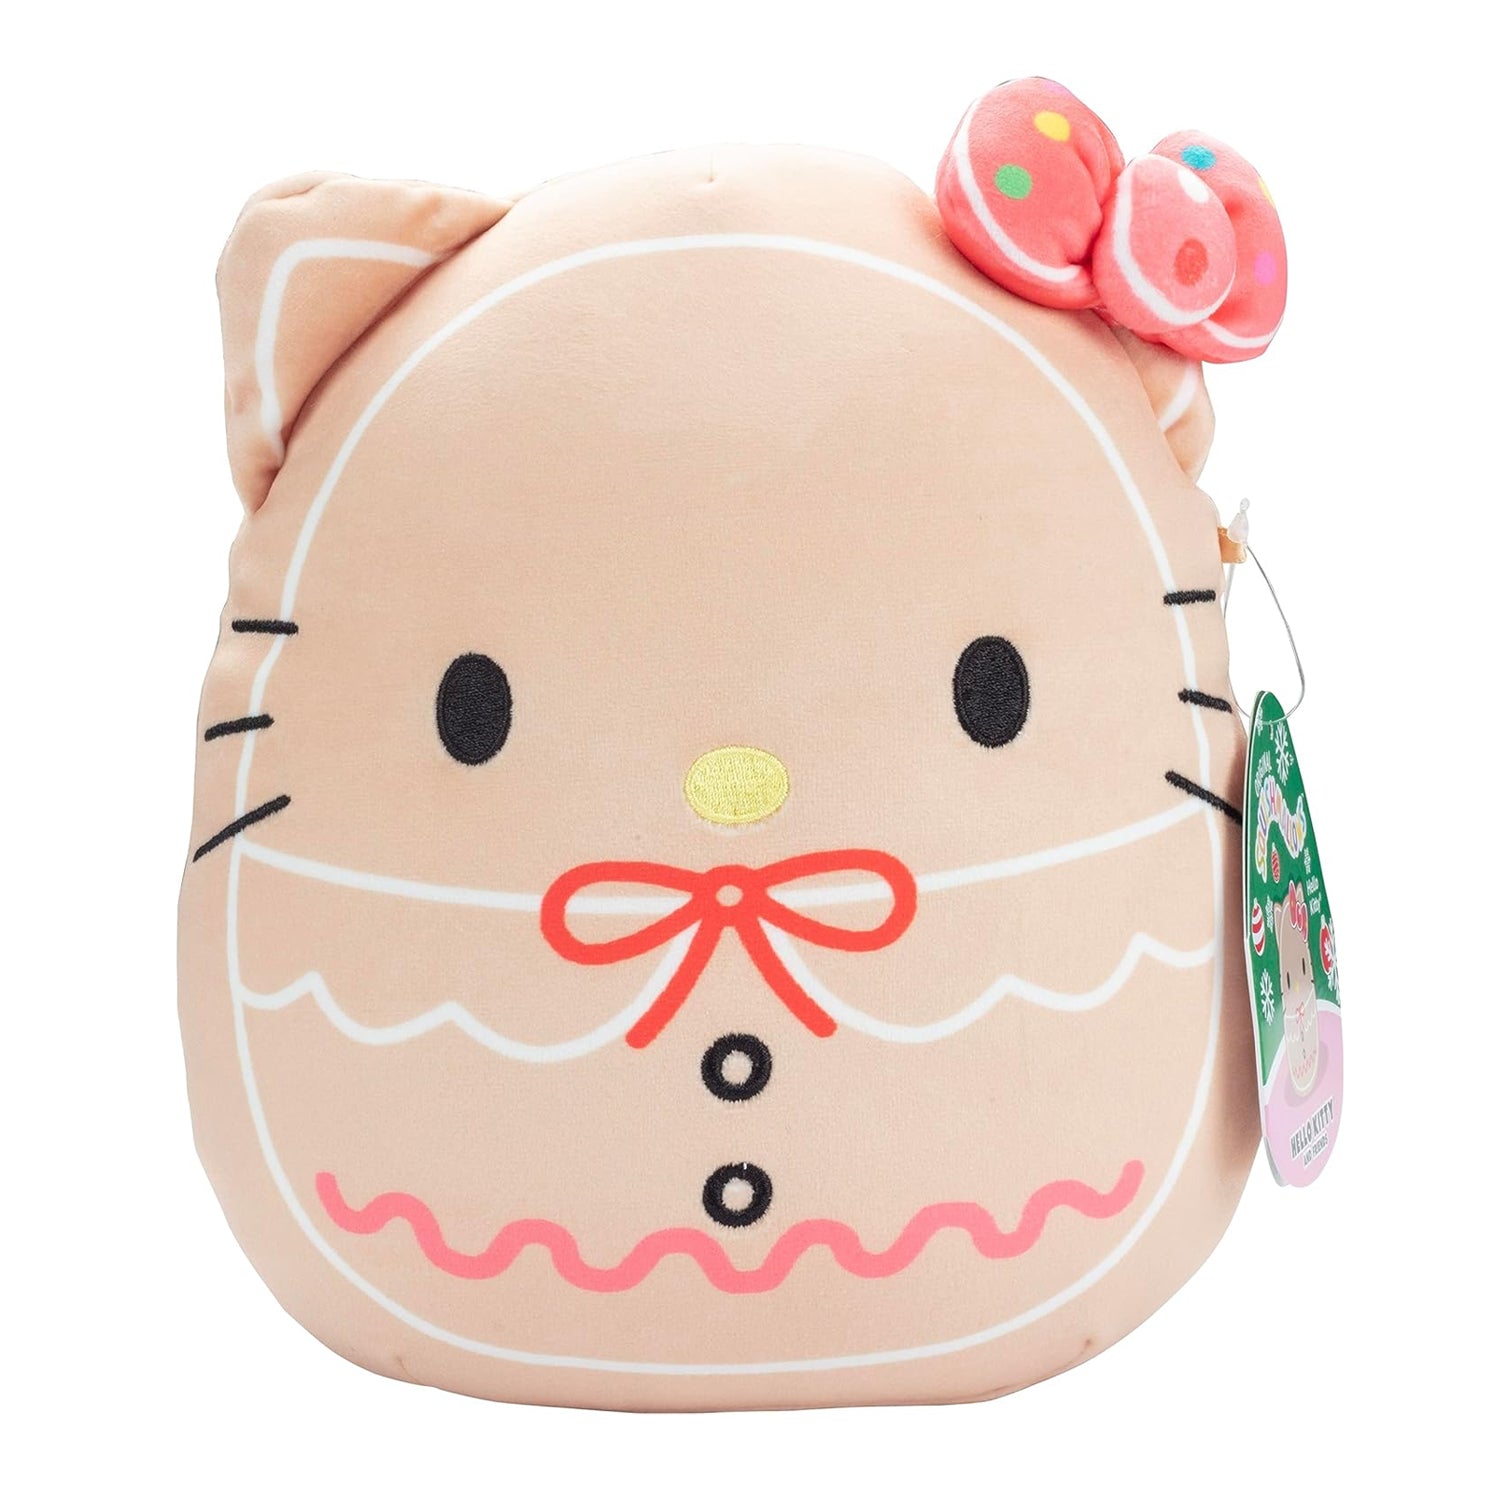 Squishmallow - Hello Kitty Holiday Trio 8" Plush Holiday 2023 NEW RELEASE